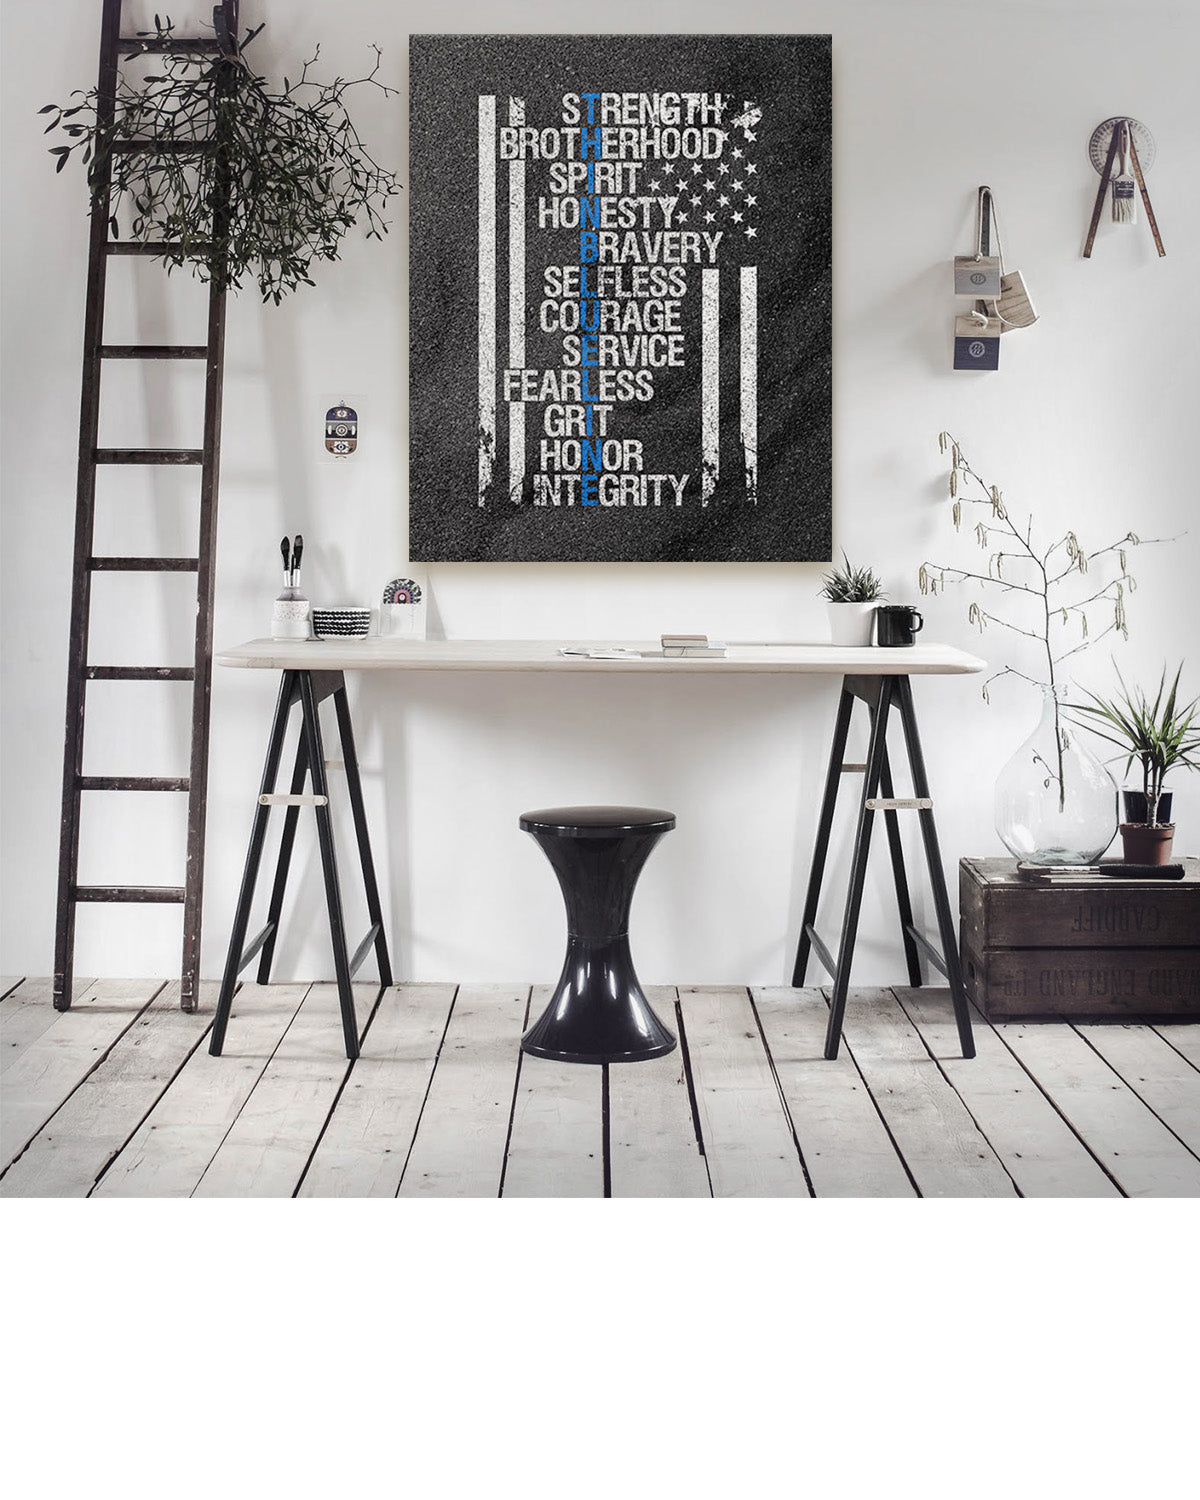 Thin Blue Line Wall Art Print - Law Enforcement Prints - Police Officer Gifts - Police Academy Graduation - Police Officer Wall Decor - Law Enforcement Appreciation Gift